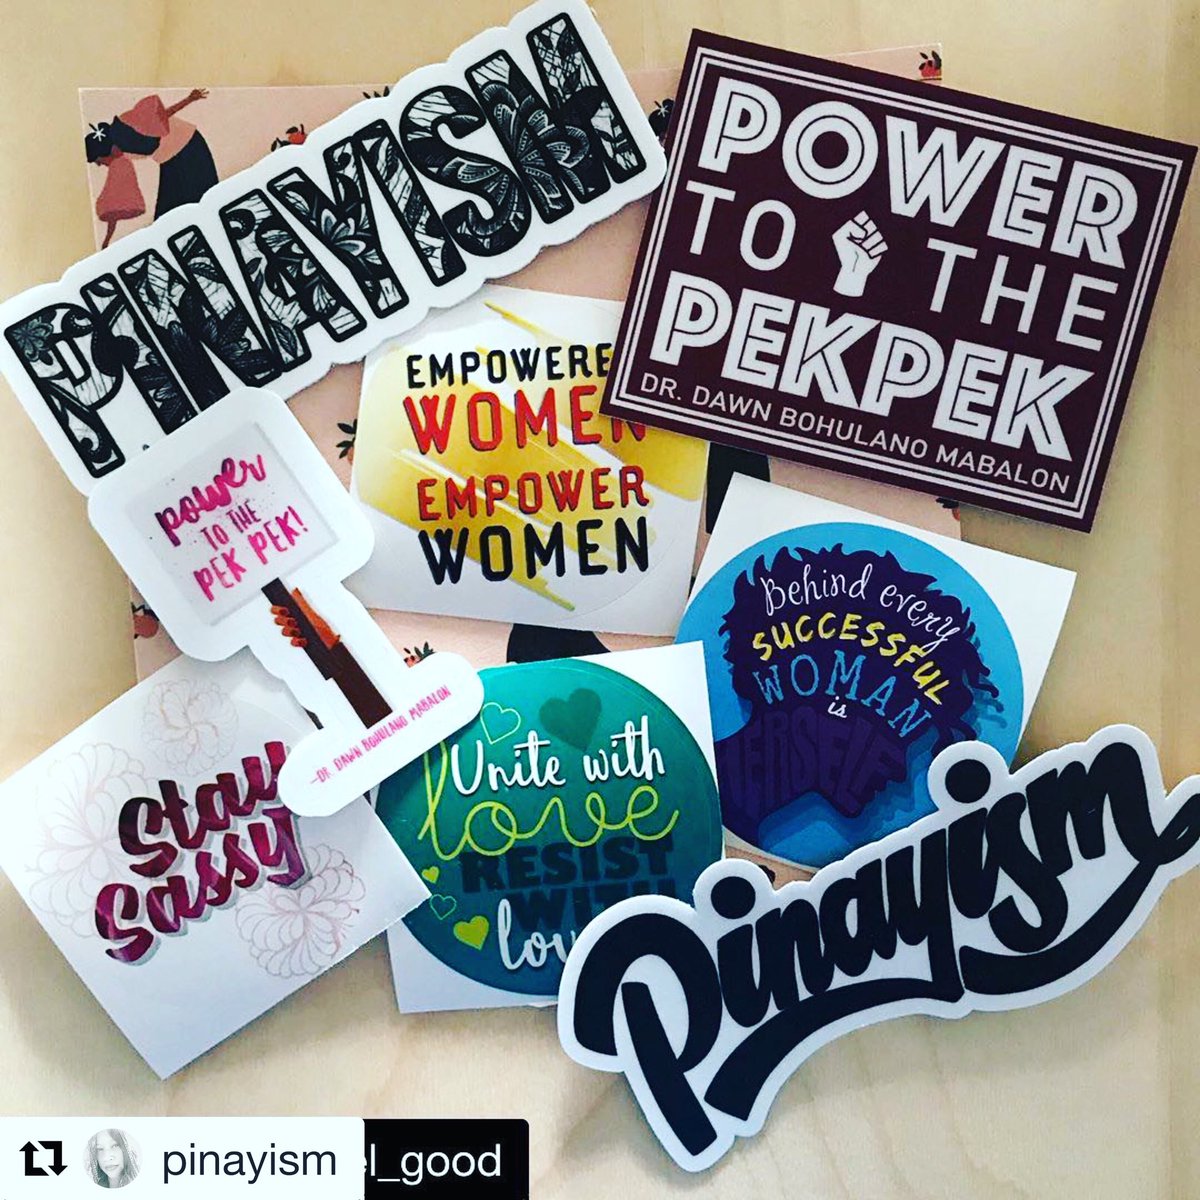 A custom sticker dedicated to. @fanhs_national historian @drdawnbm #dawnmabalonisintheheart #Repost @pinayism
・・・
PINAYisMAMA Swag Stickers! Thank you @jjtypography for designing the pinayism ones! Aileen, thank you for designing the pek pek one:) #pinayismama